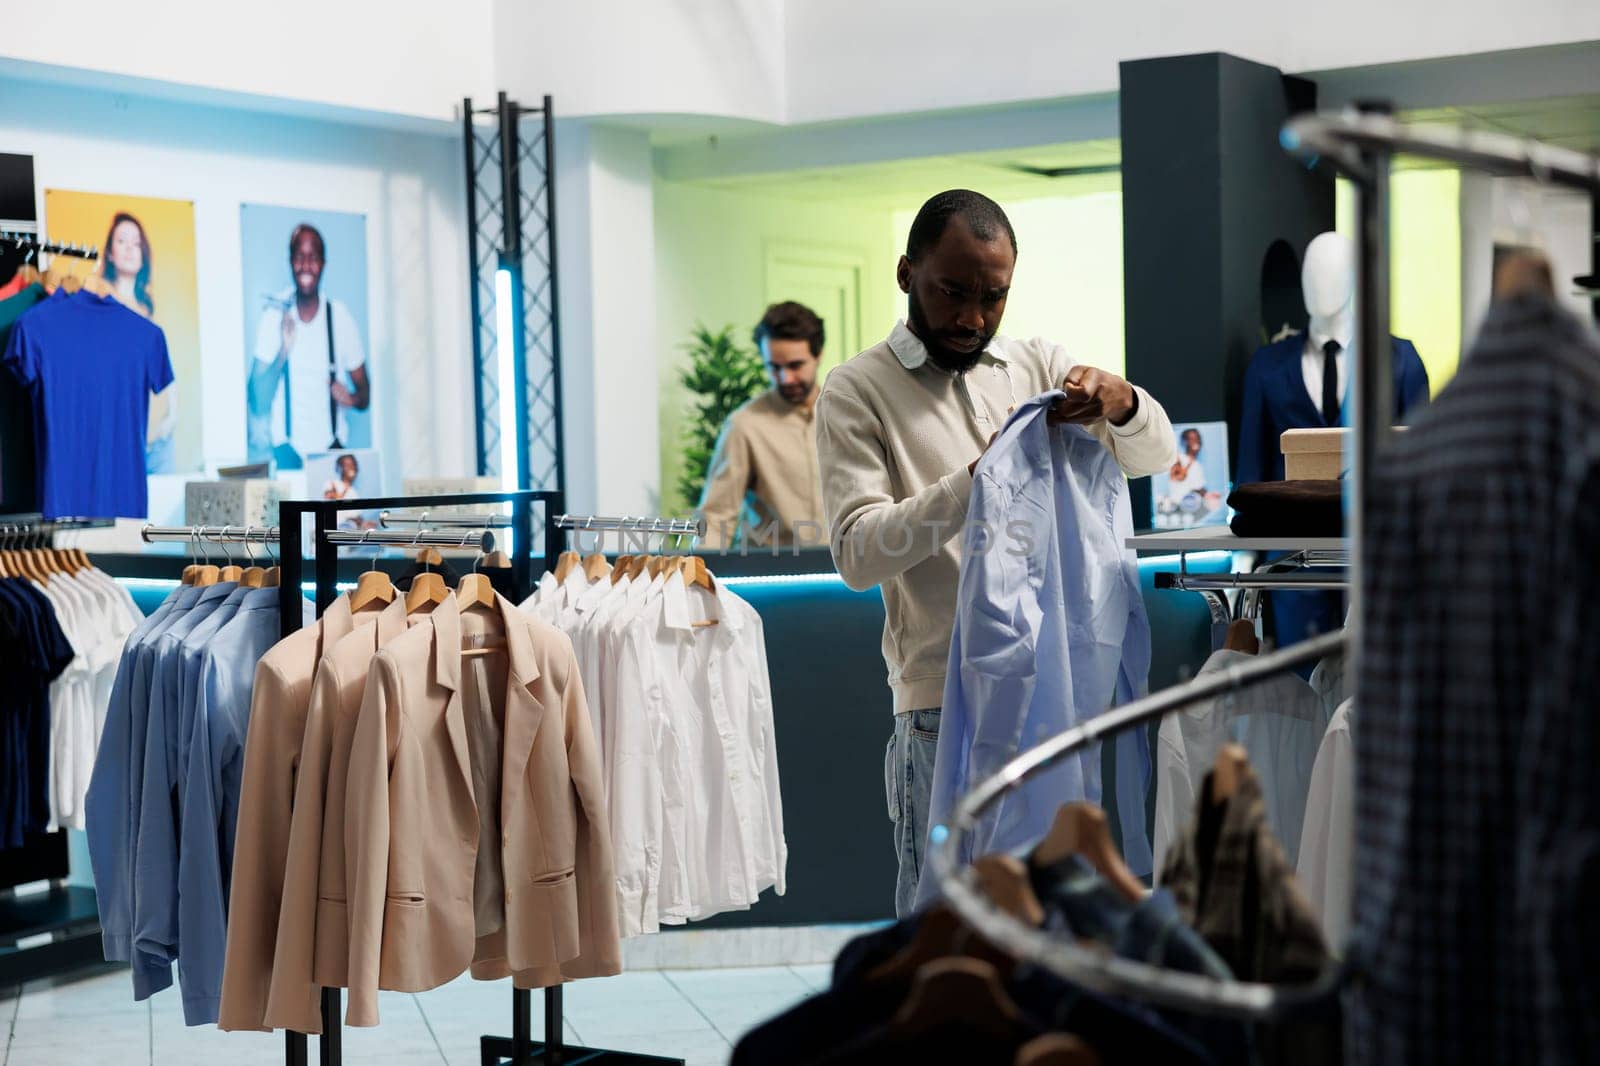 African american buyer checking size on shirt label while choosing trendy formal wear in shopping mall boutique. Young man browsing fashionable apparel on hanger in showroom